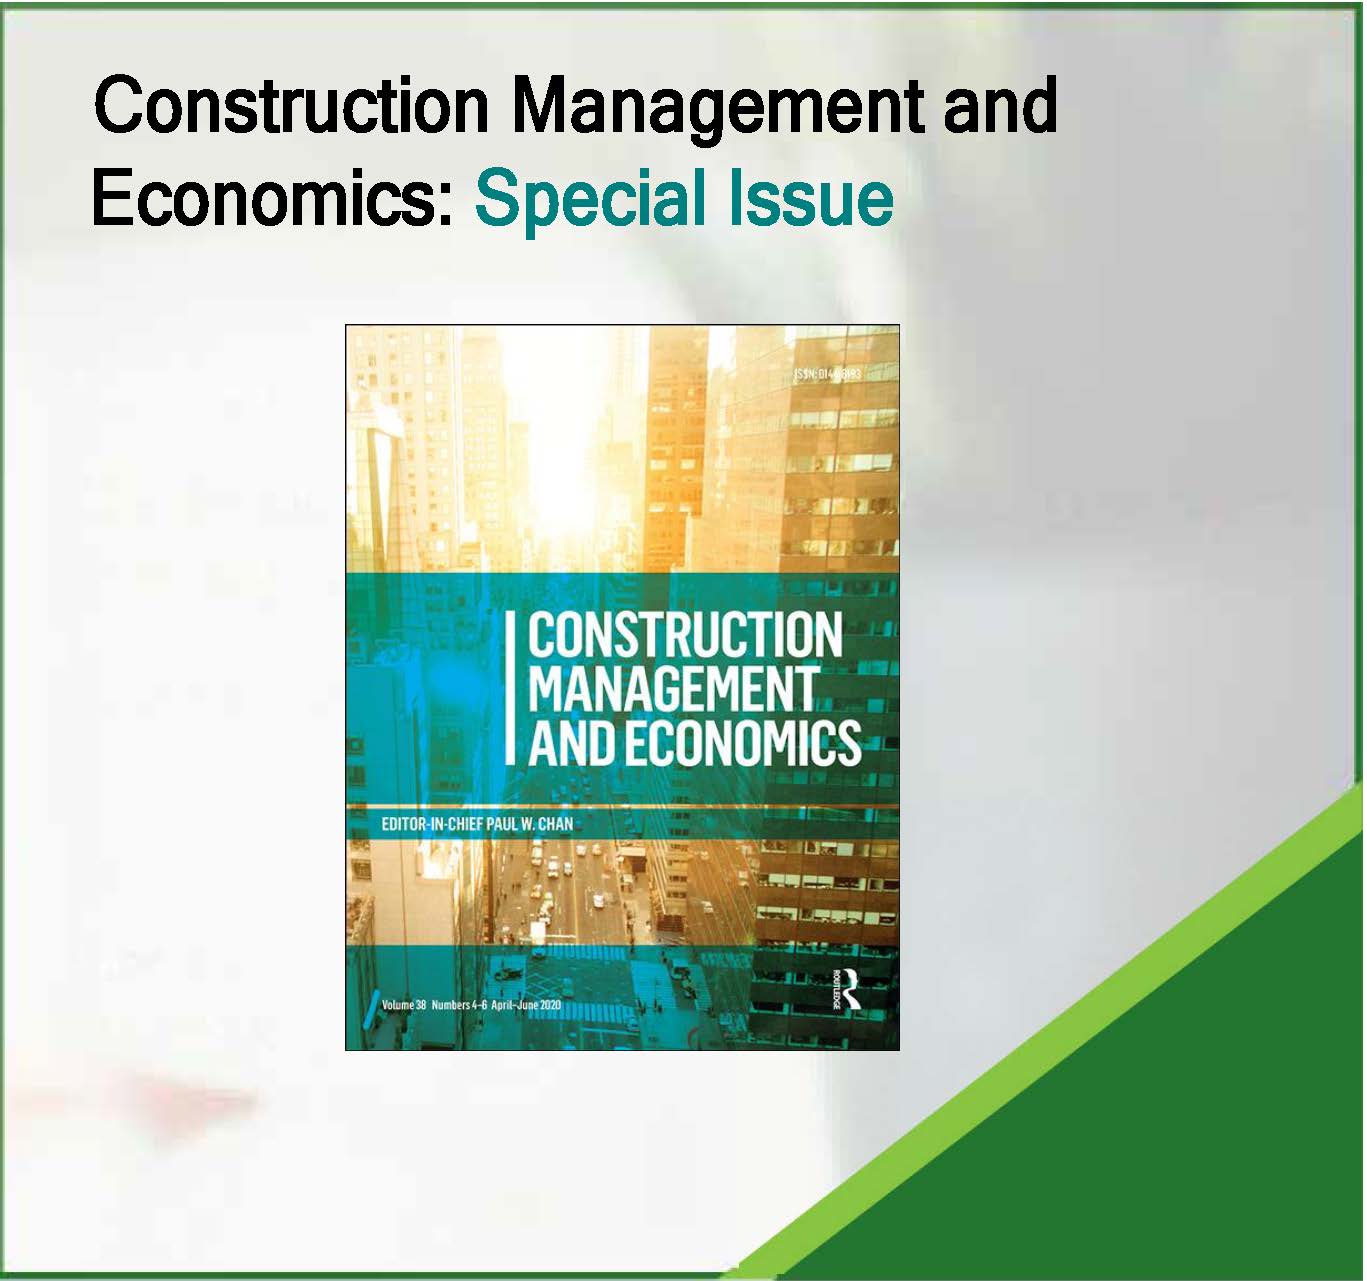 Construction Management and Economics: Grand challenges facing our cities: where construction management research meets the urban field